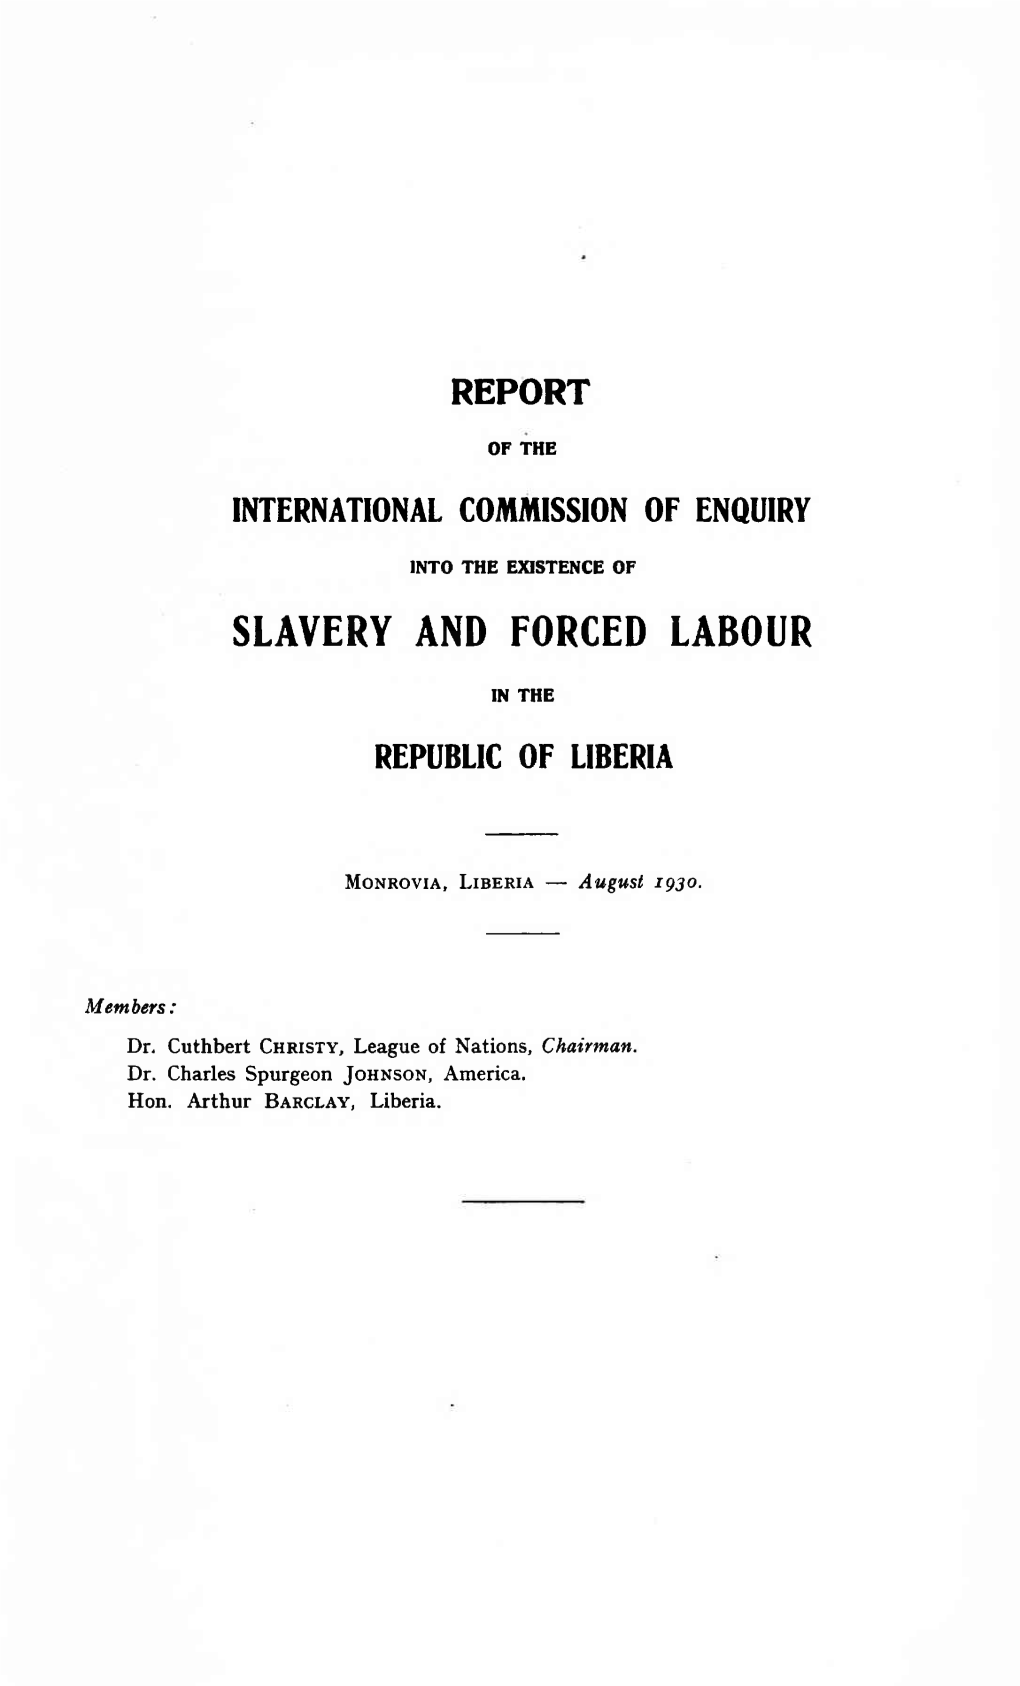 Slavery and Forced Labour